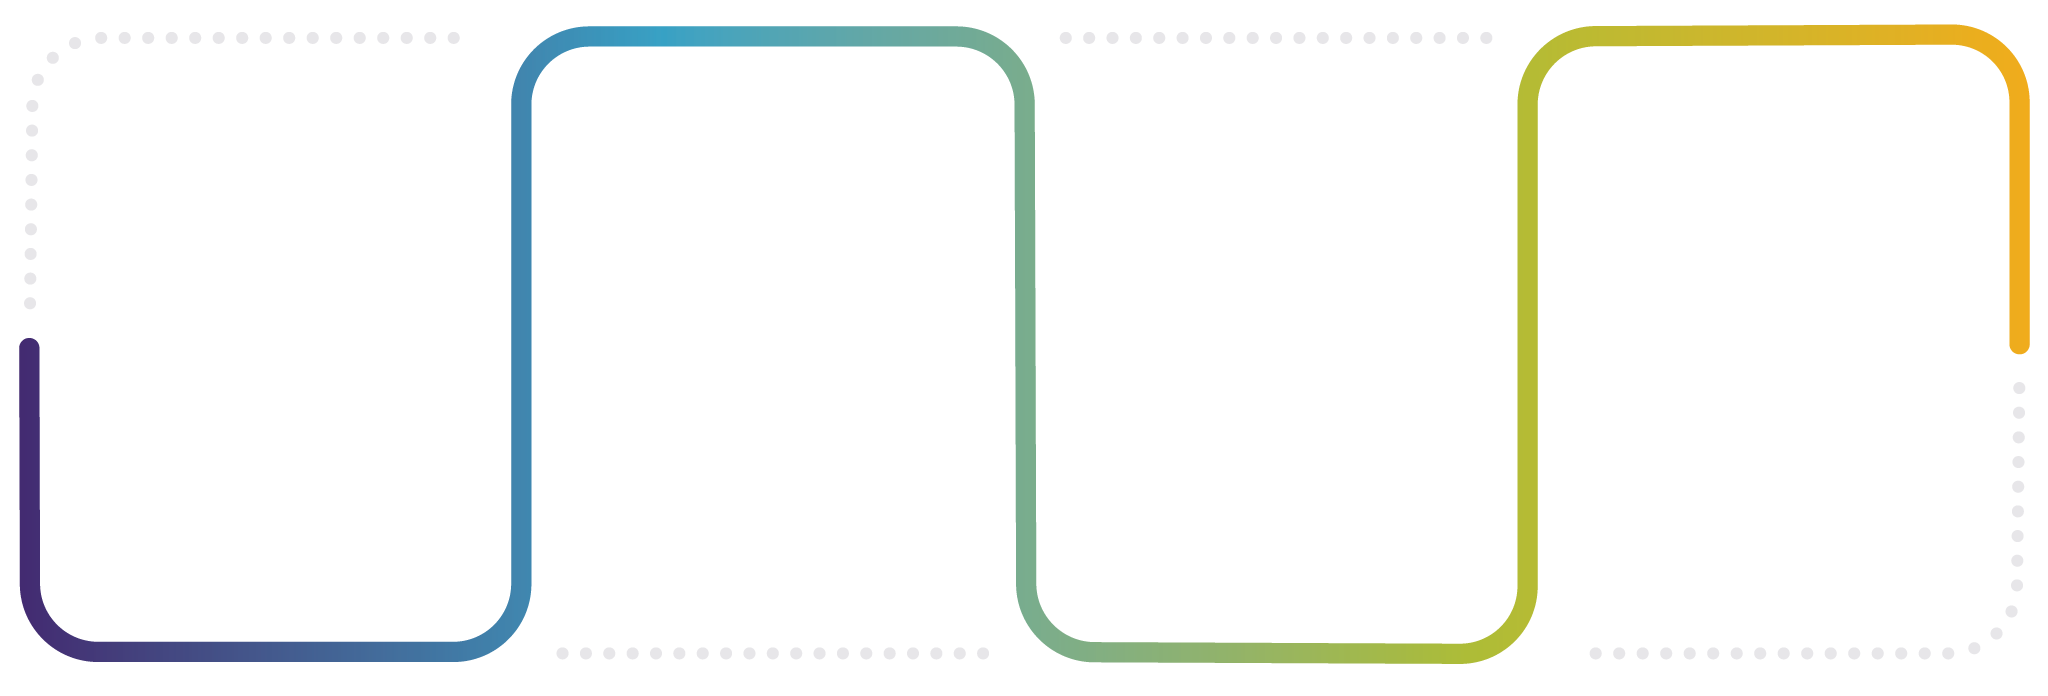 The four key modules of INSPIRE as a process showing Understanding the Access Challenges, Engage Stakeholders, Ideate and Test Solutions and Negotiate Effectively